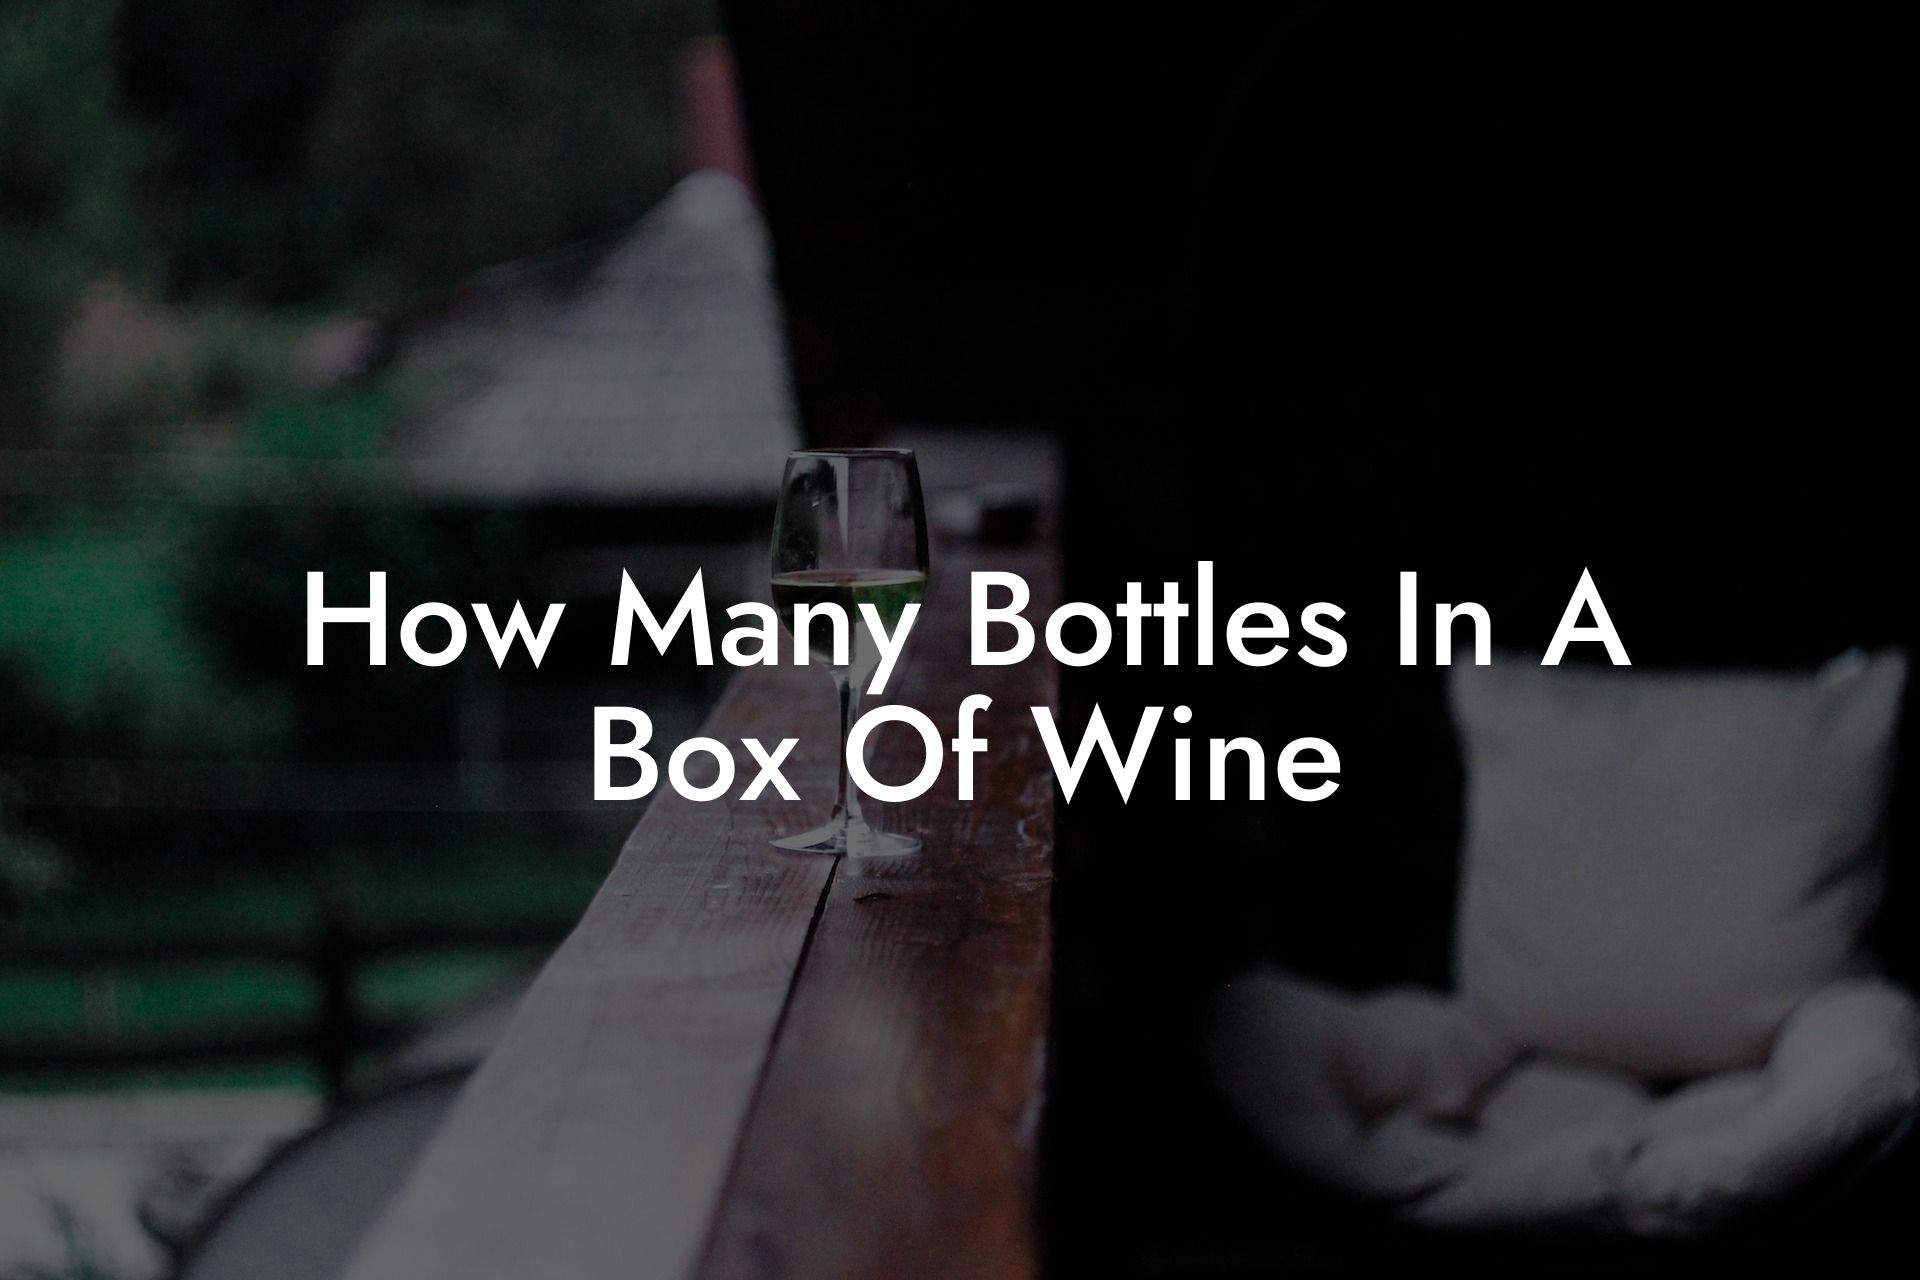 How Many Bottles In A Box Of Wine